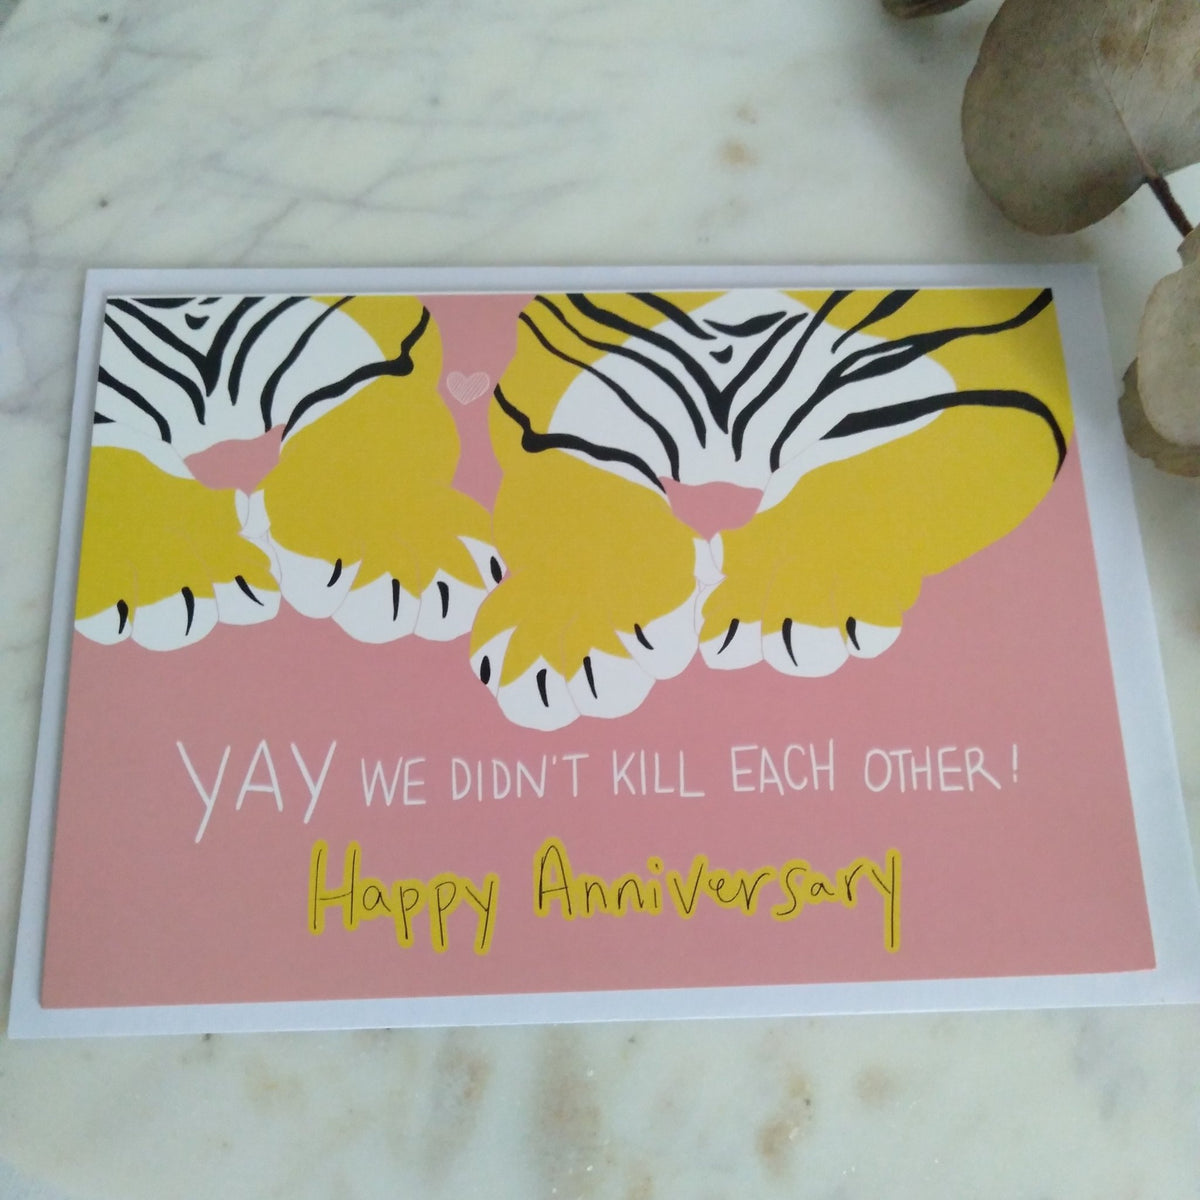 SadHumansHopeYAY we didn't kill Greeting Card #same day gift delivery melbourne#